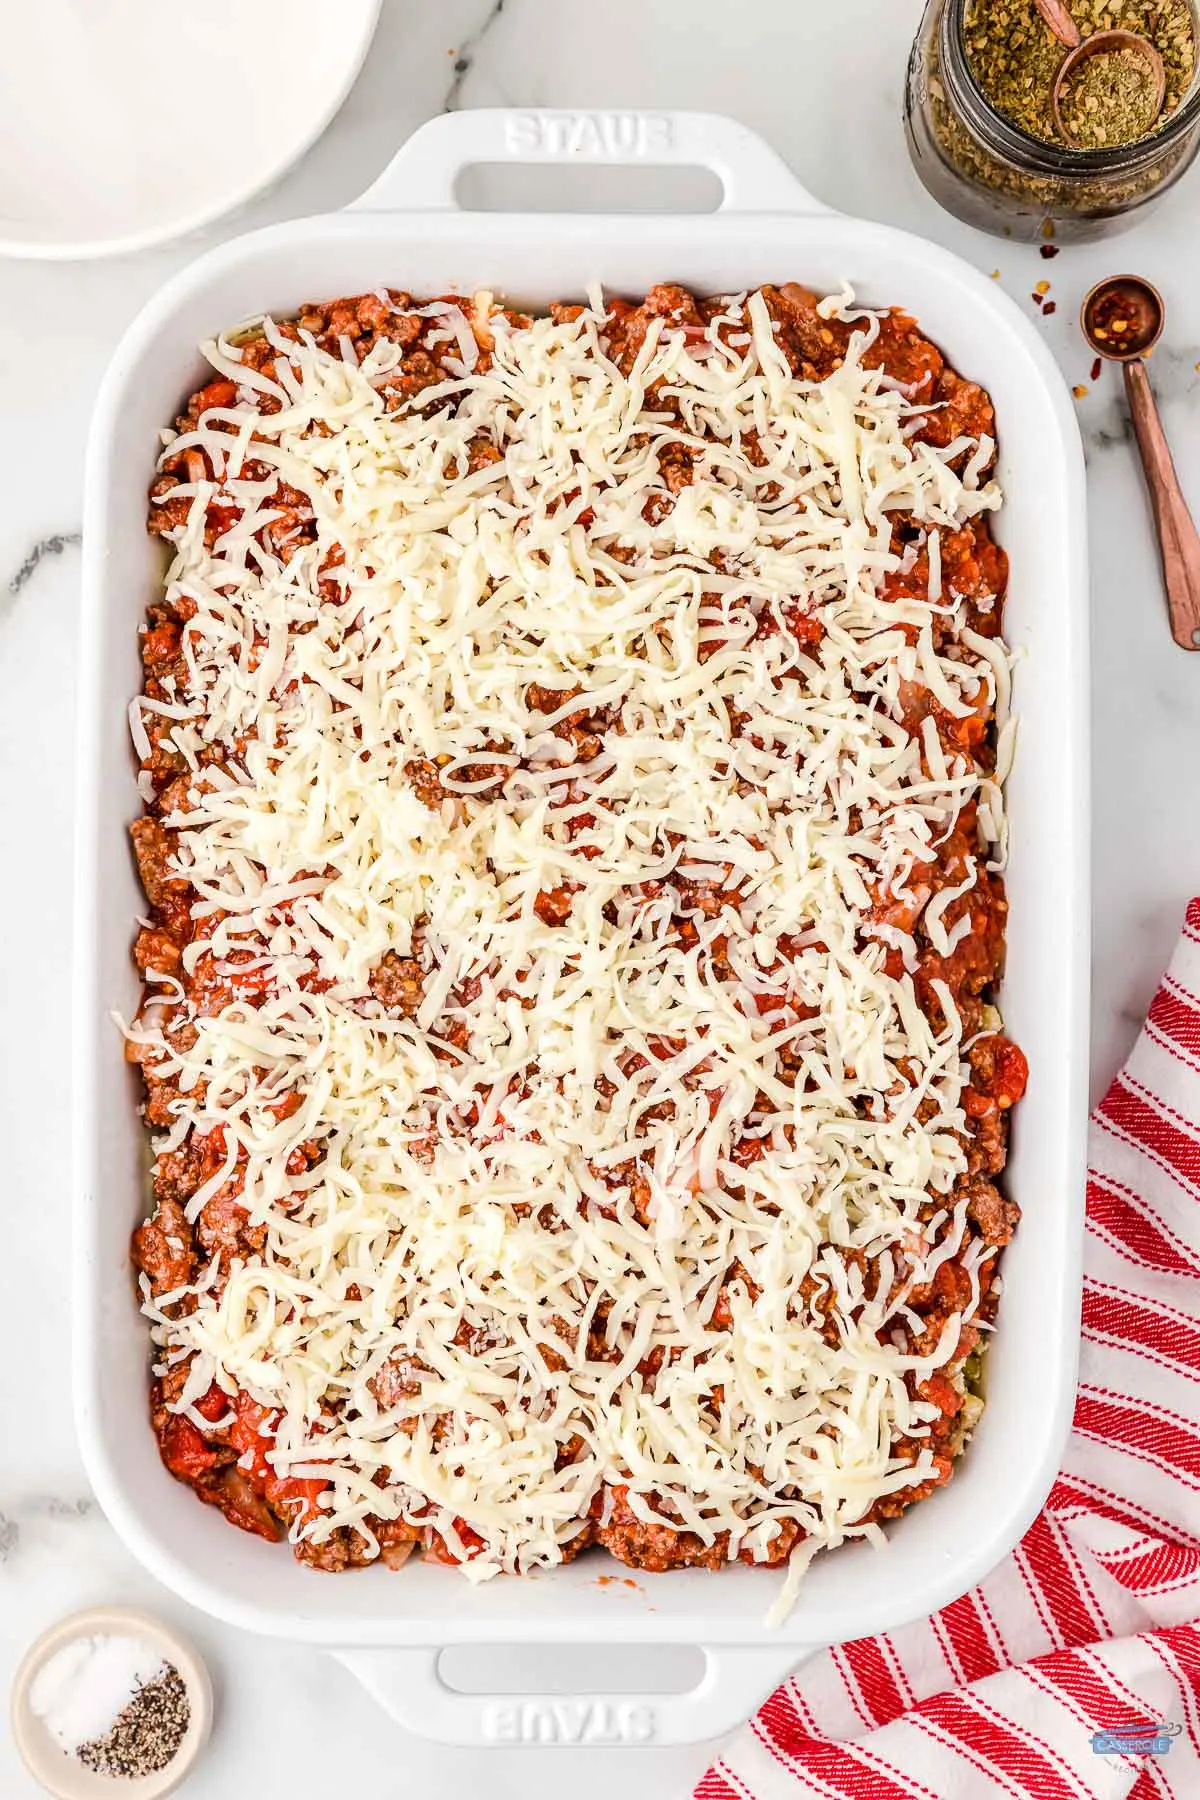 red sauce in a dish topped with shredded cheese